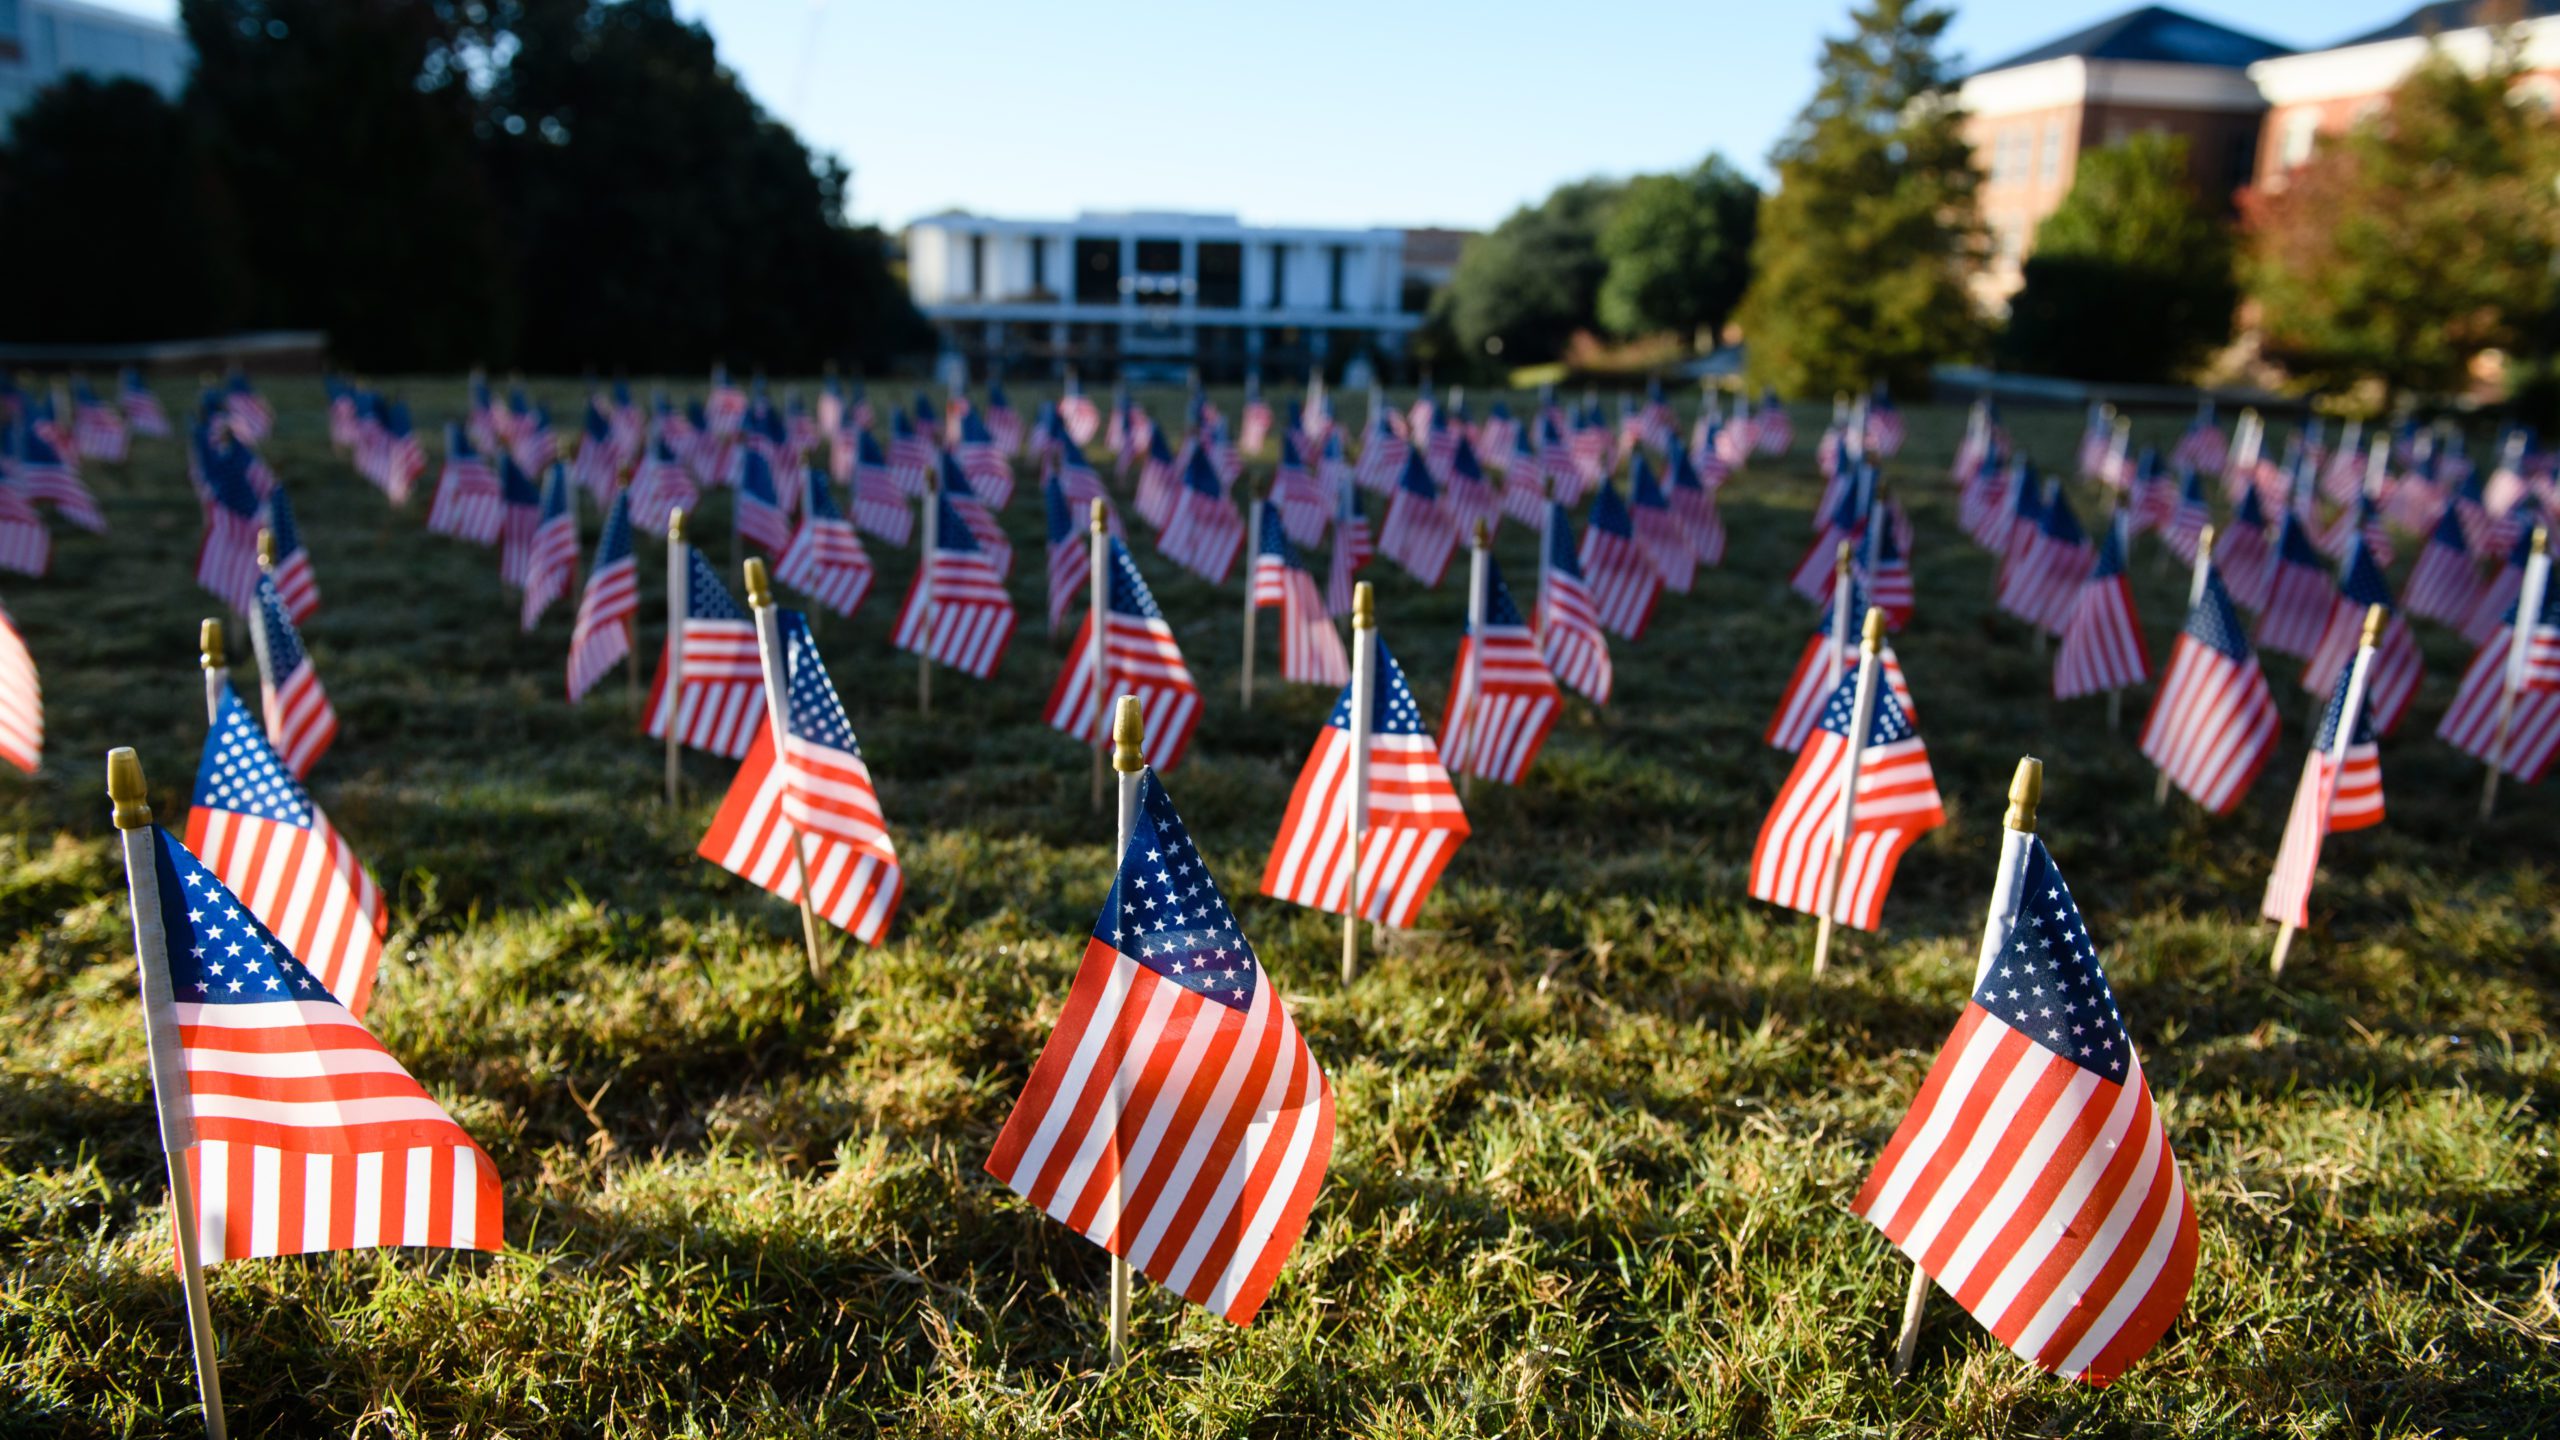 American flags displayed in Carillon Garden during Military Appreciation Week 2021